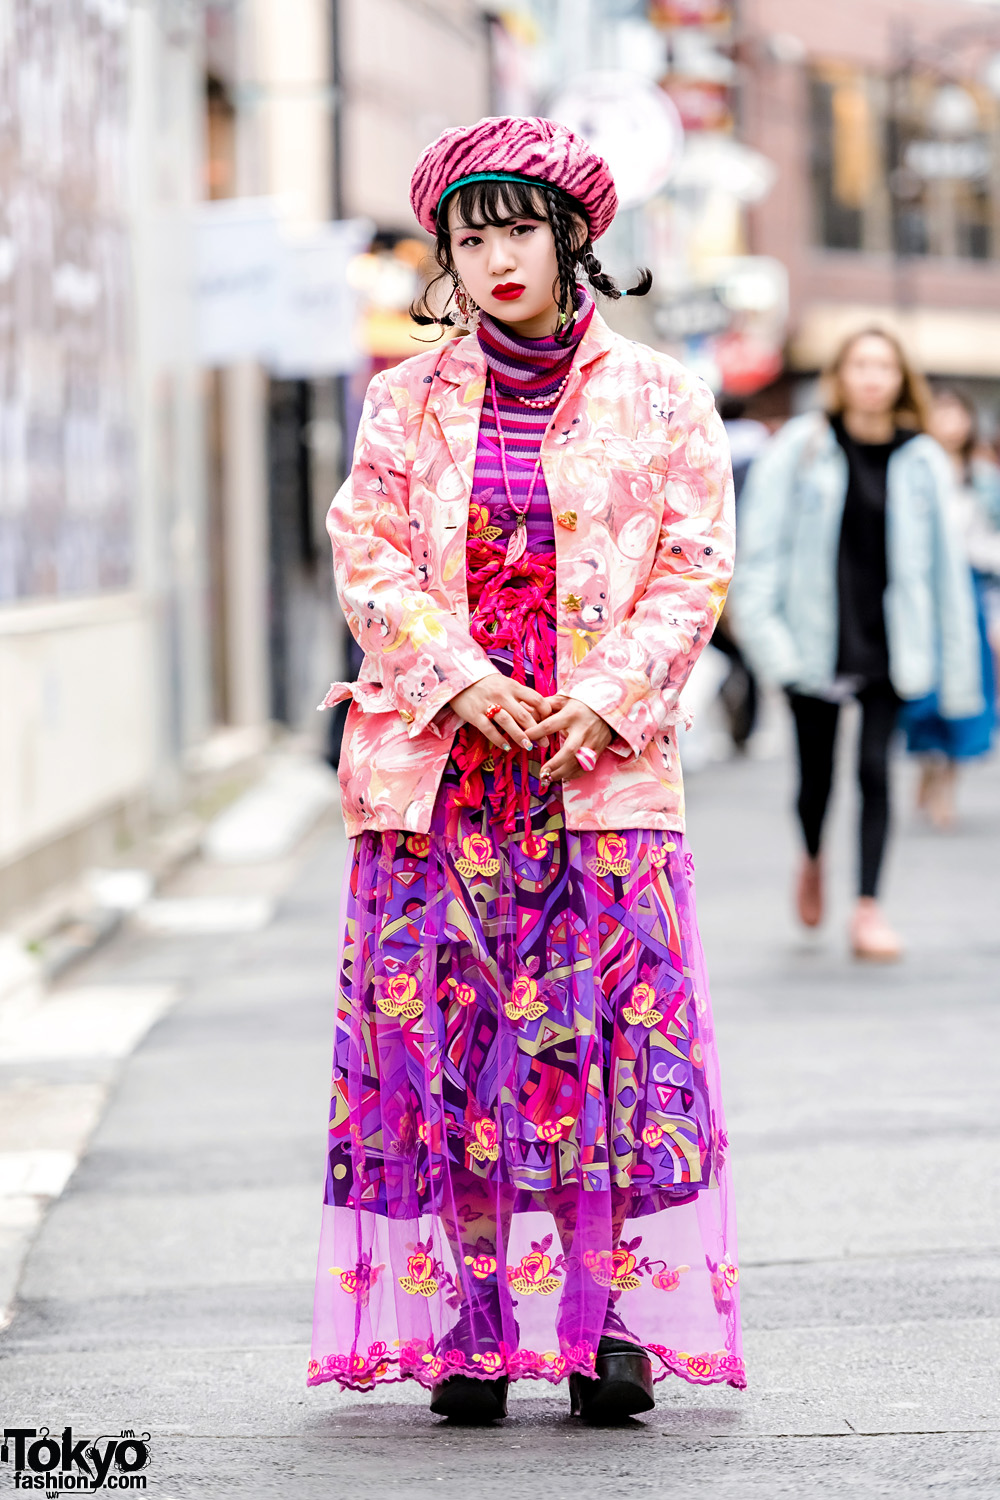 Fanatic Tokyo Editor in Pink Mixed-Prints Street Style w/ Anna Sui, Kinji, Tokyo Bopper, Tricot Comme des Garcons, Cayhane & Jubilee